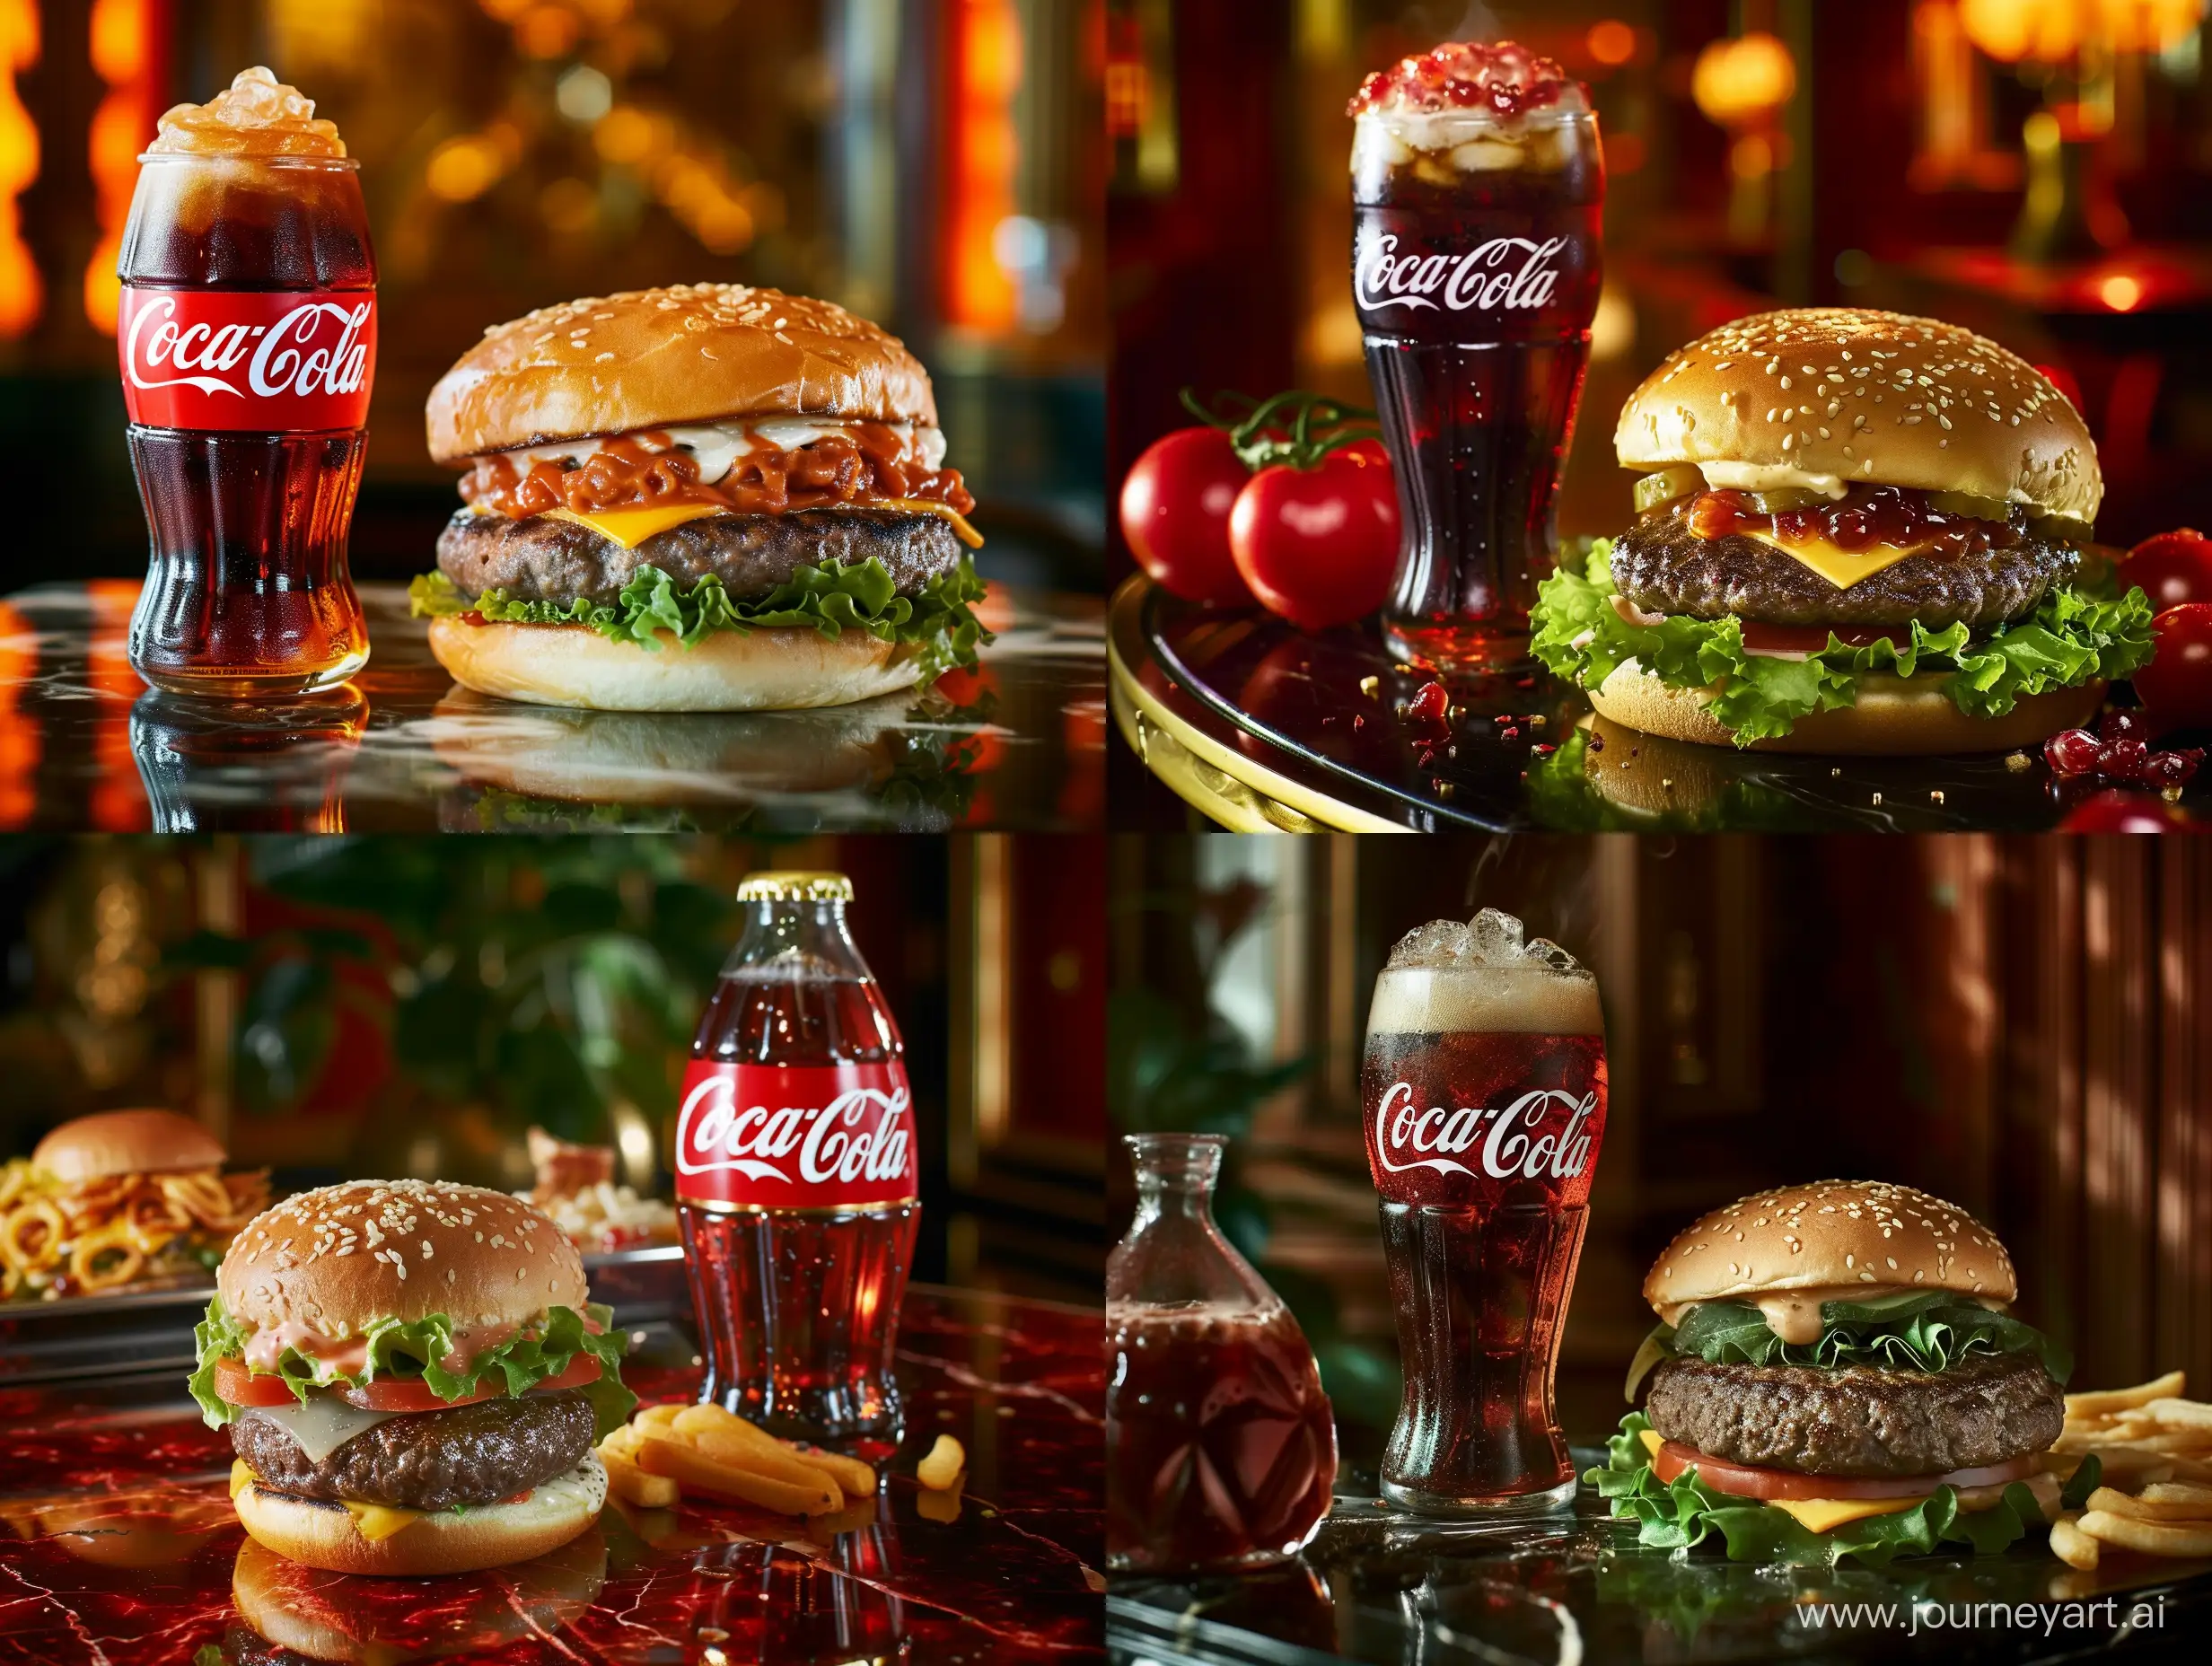 Luxurious-500-Hamburger-and-CocaCola-on-Opulent-Table